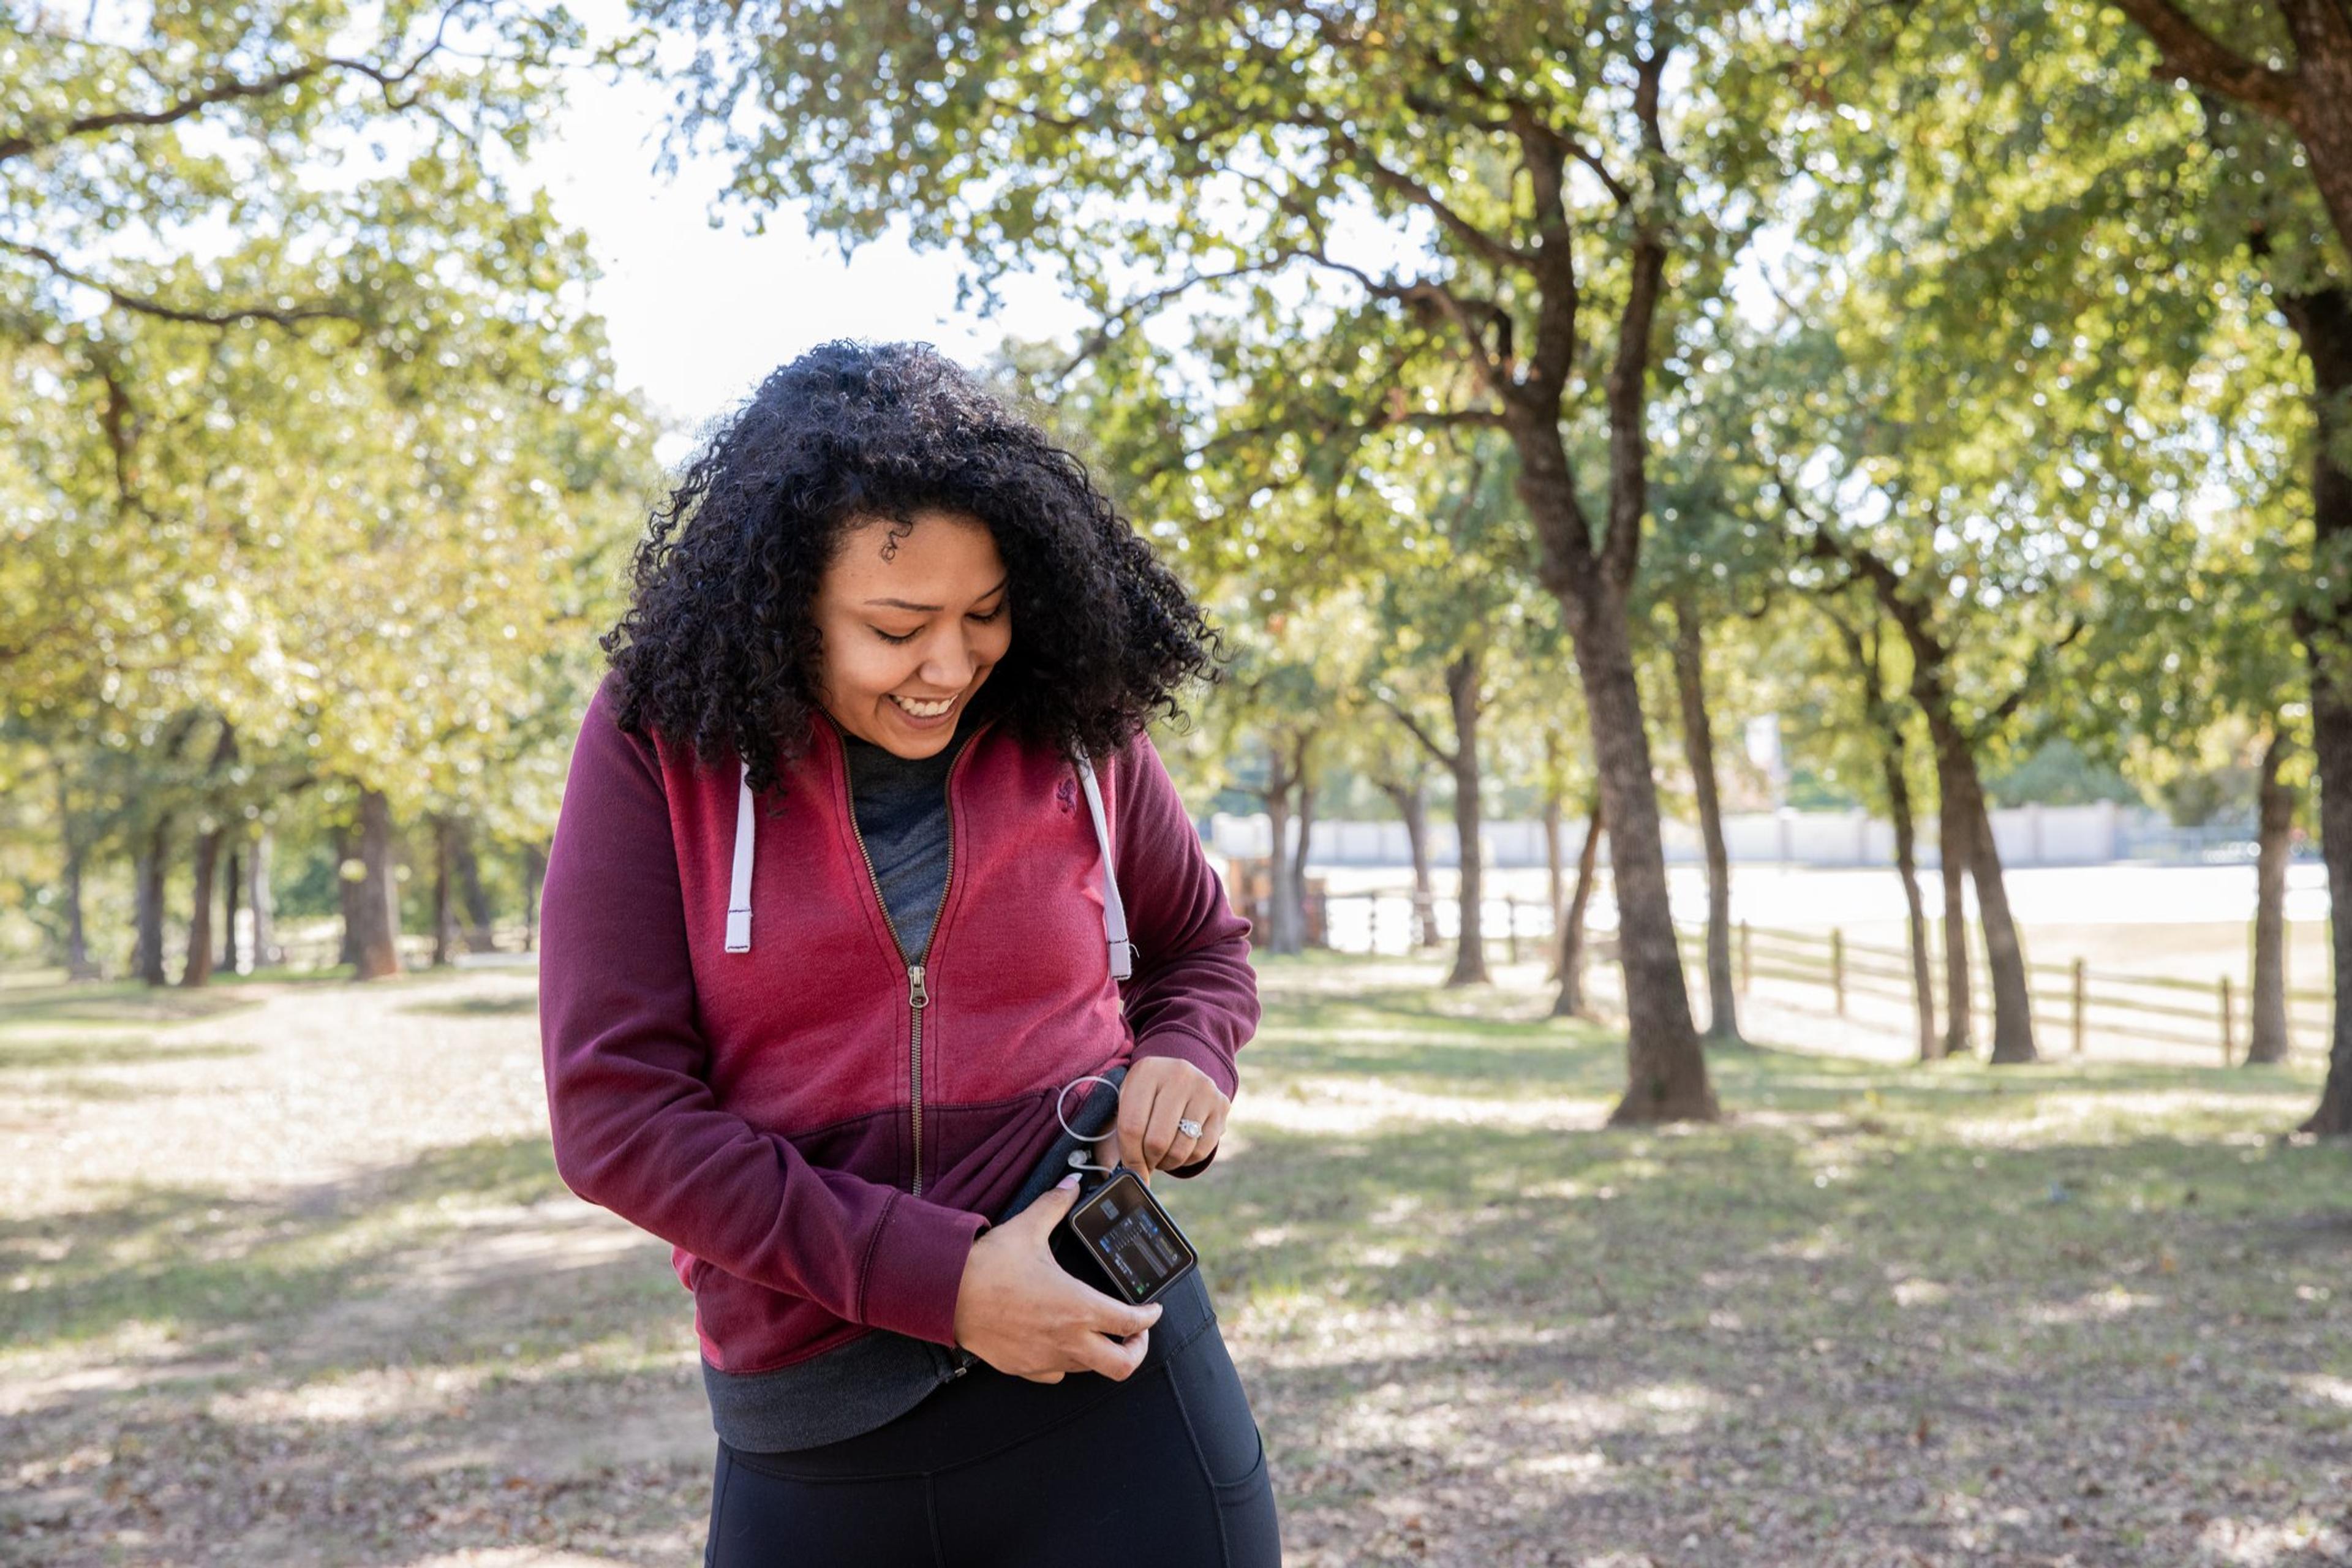 Young woman with diabetes checks insulin pump and blood sugar monitor while hiking outdoors